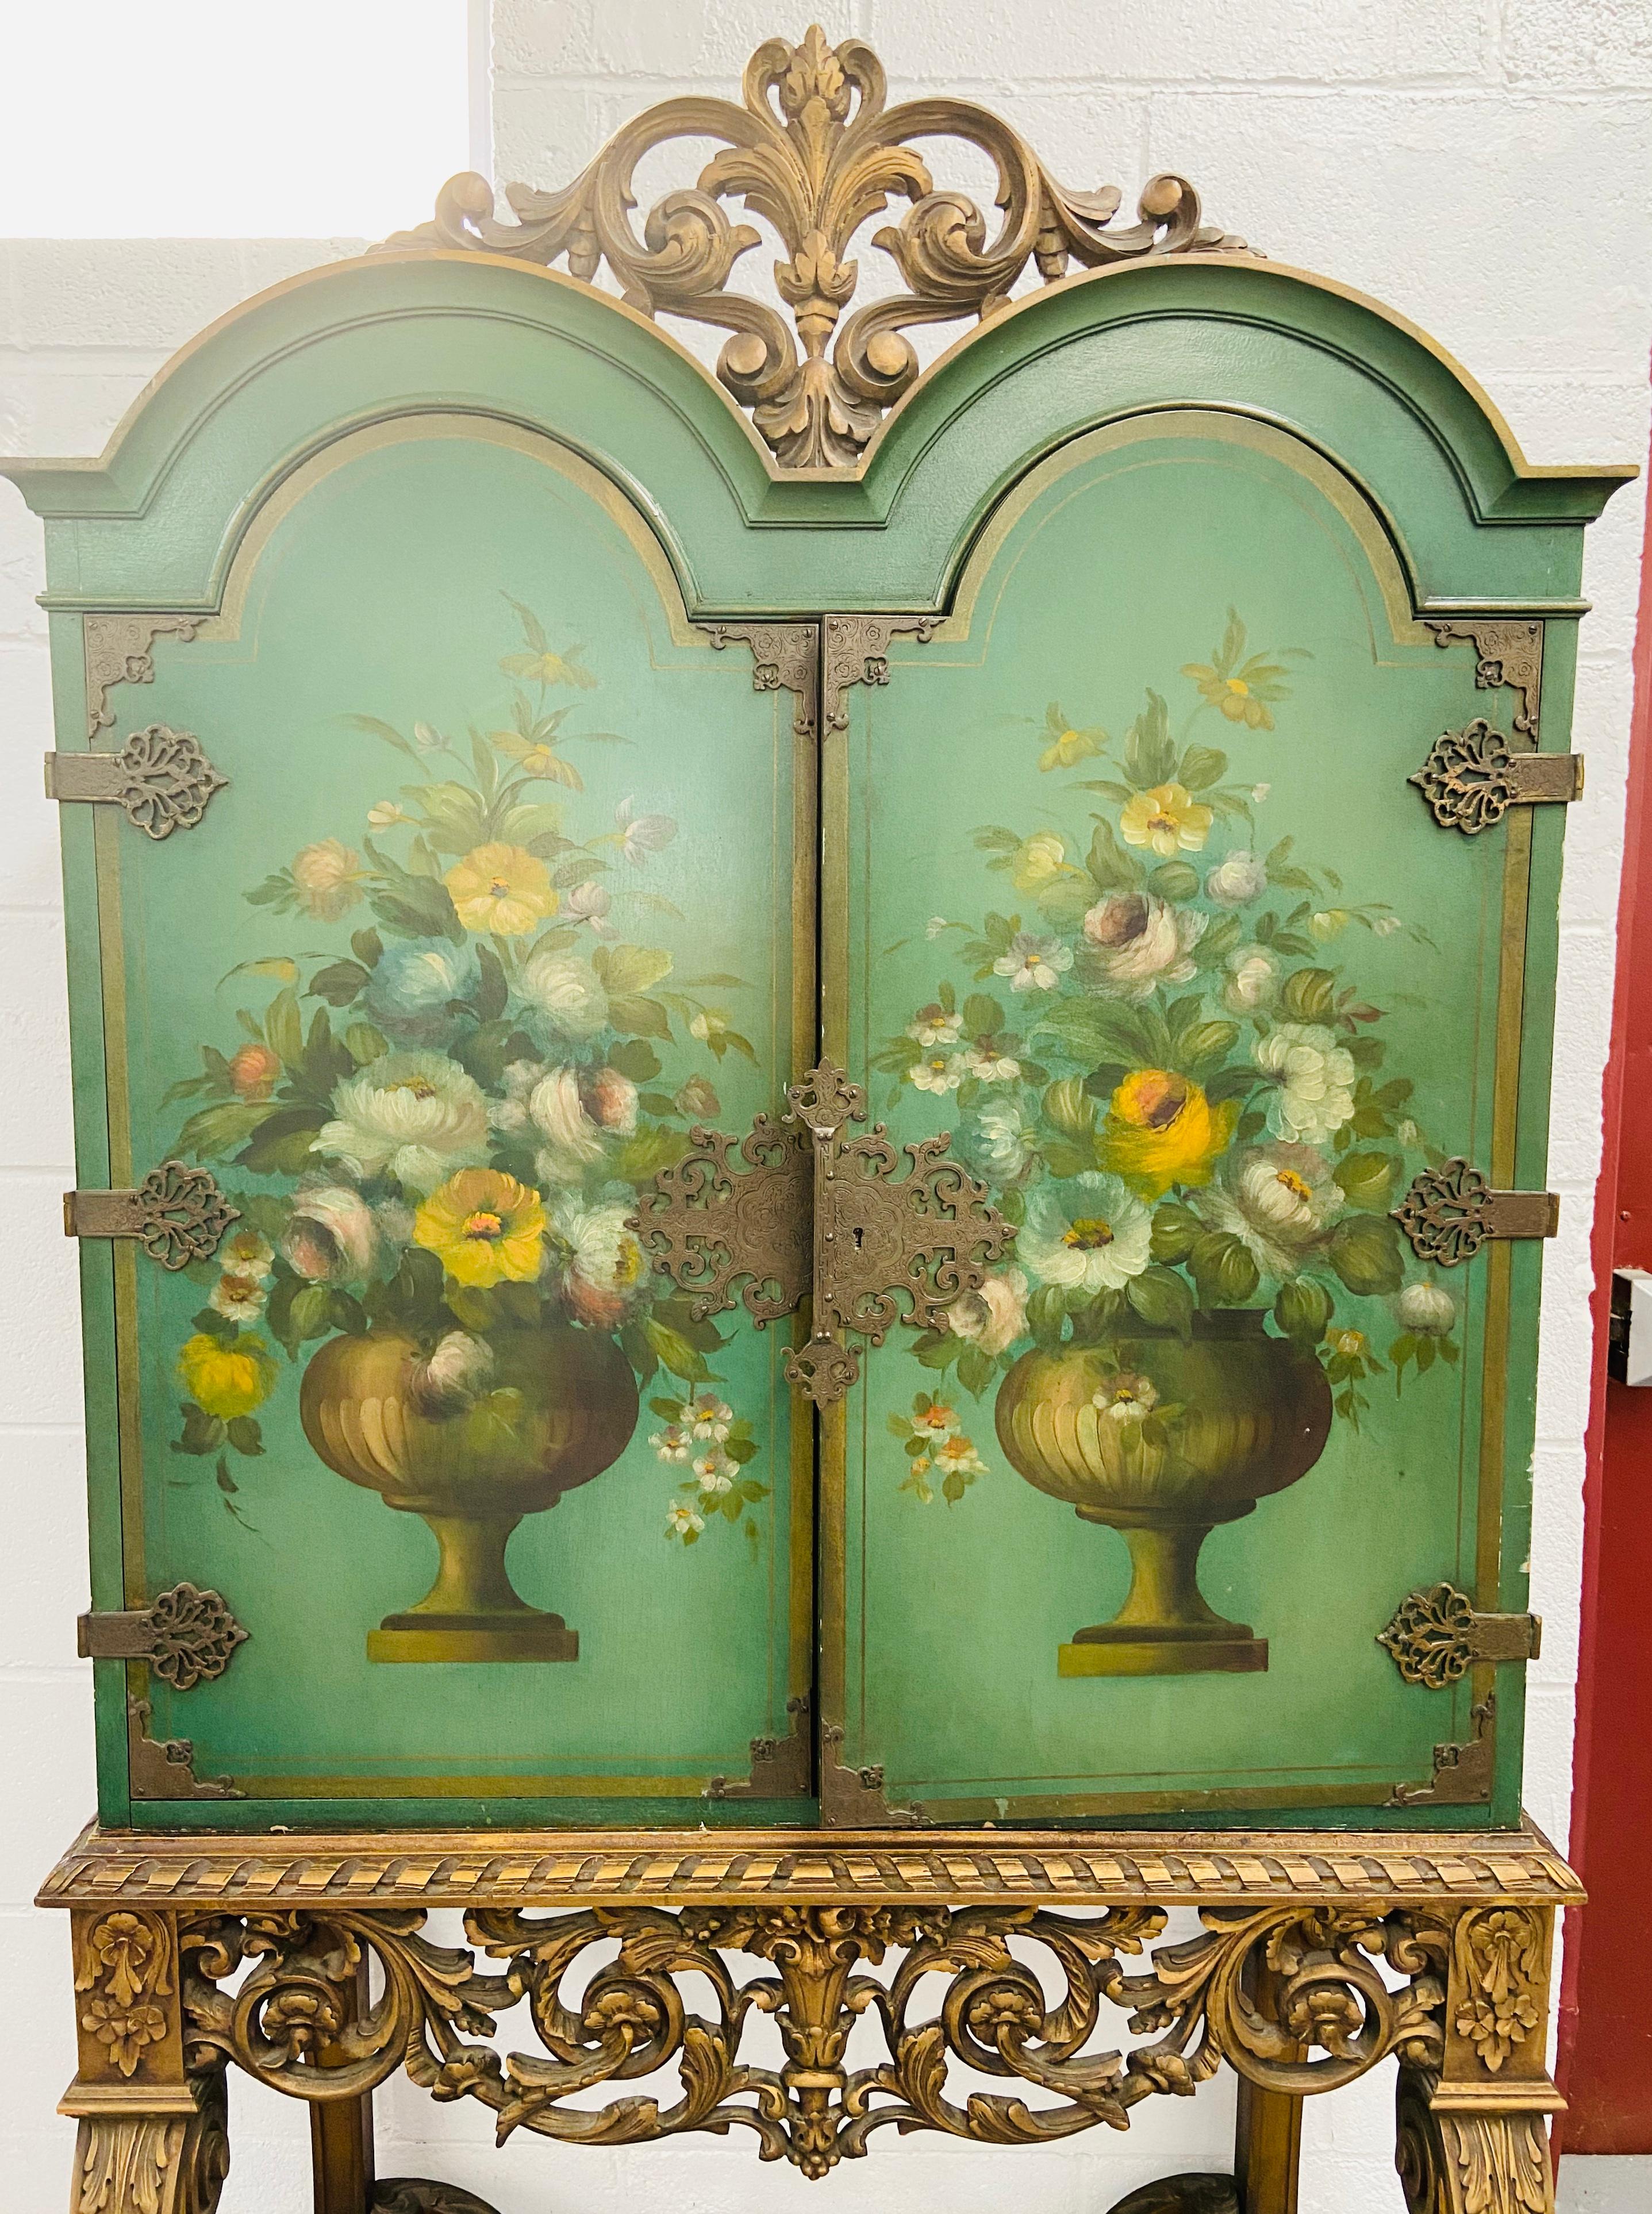 1900s English Paint Decorated Radio Cabinet Cupboard 
This gorgeous English two door floral paint and gilt decorated radio cabinet
features refined floral design on a green background. the radio cabinet has multiple storage shelves and a fitted room